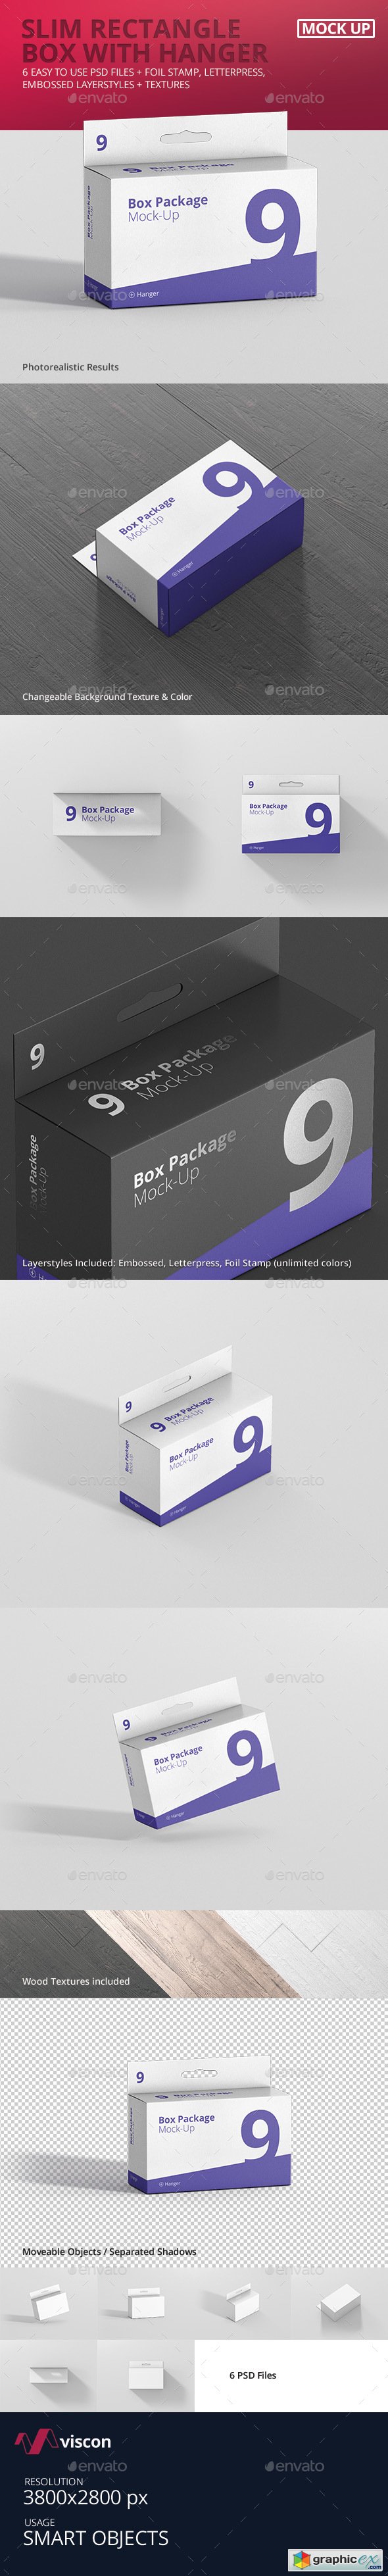 Package Box Mockup - Slim Rectangle with Hanger